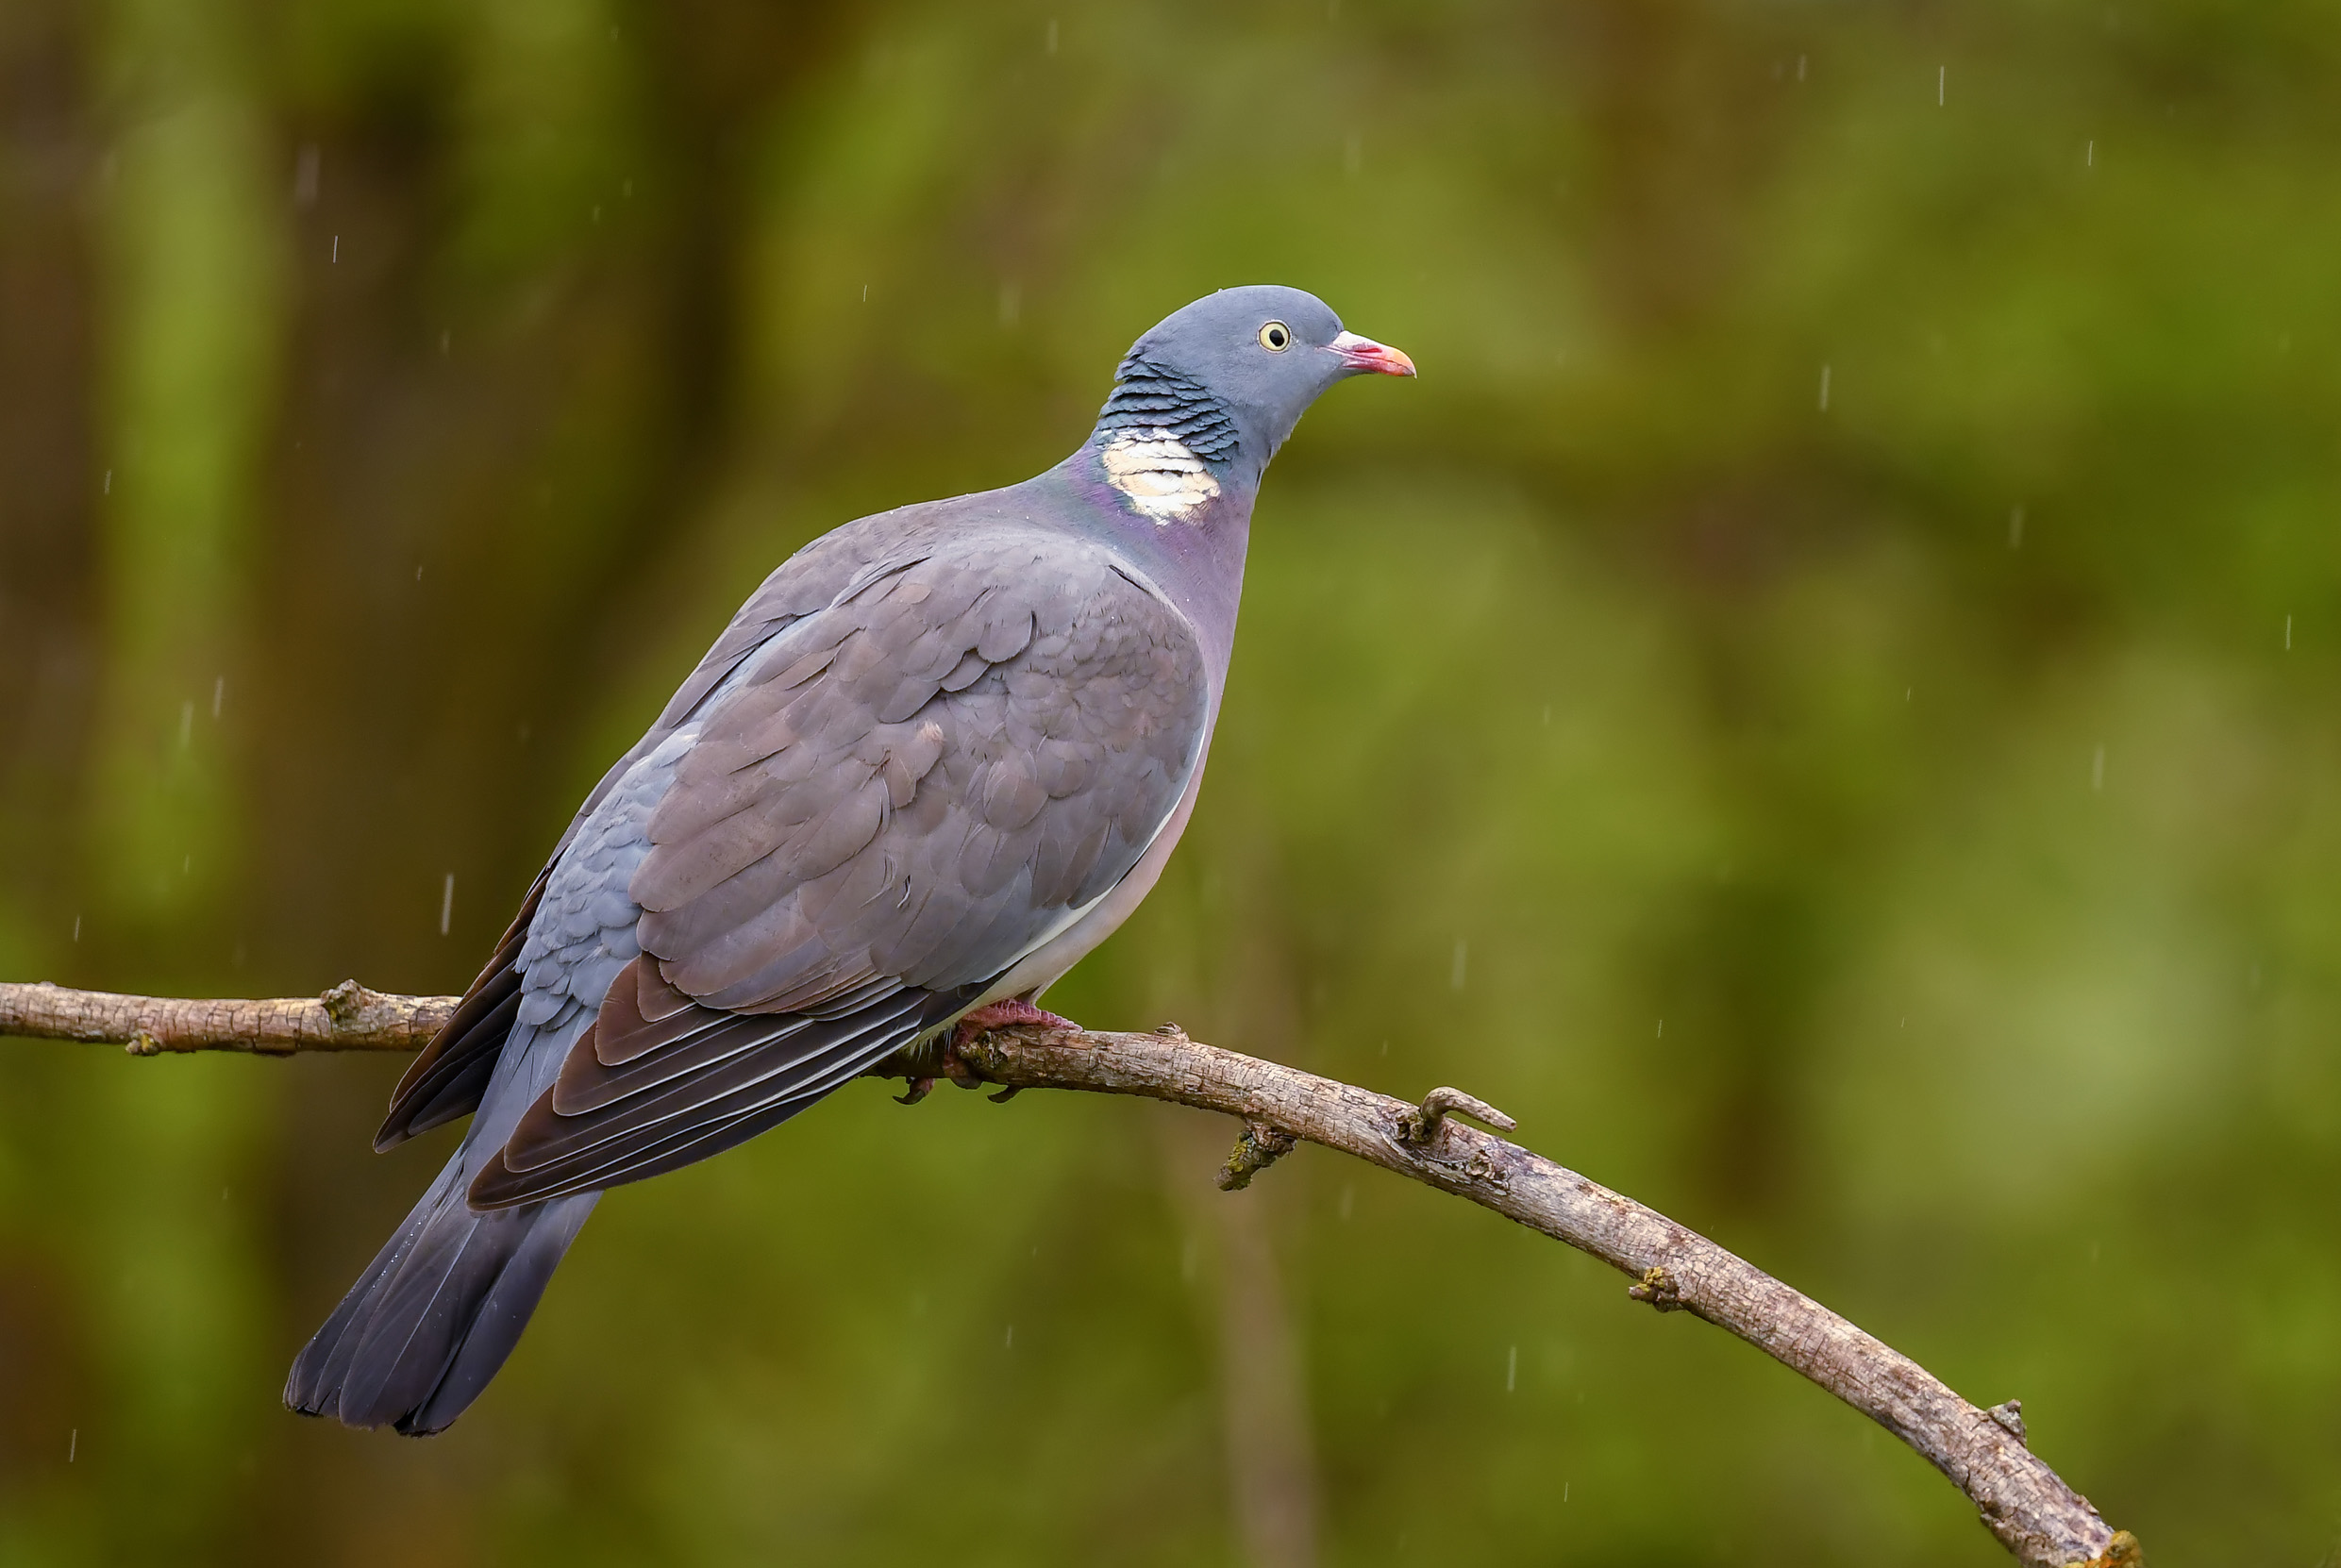 A lone Woodpigeon perched on a branch in the rain.